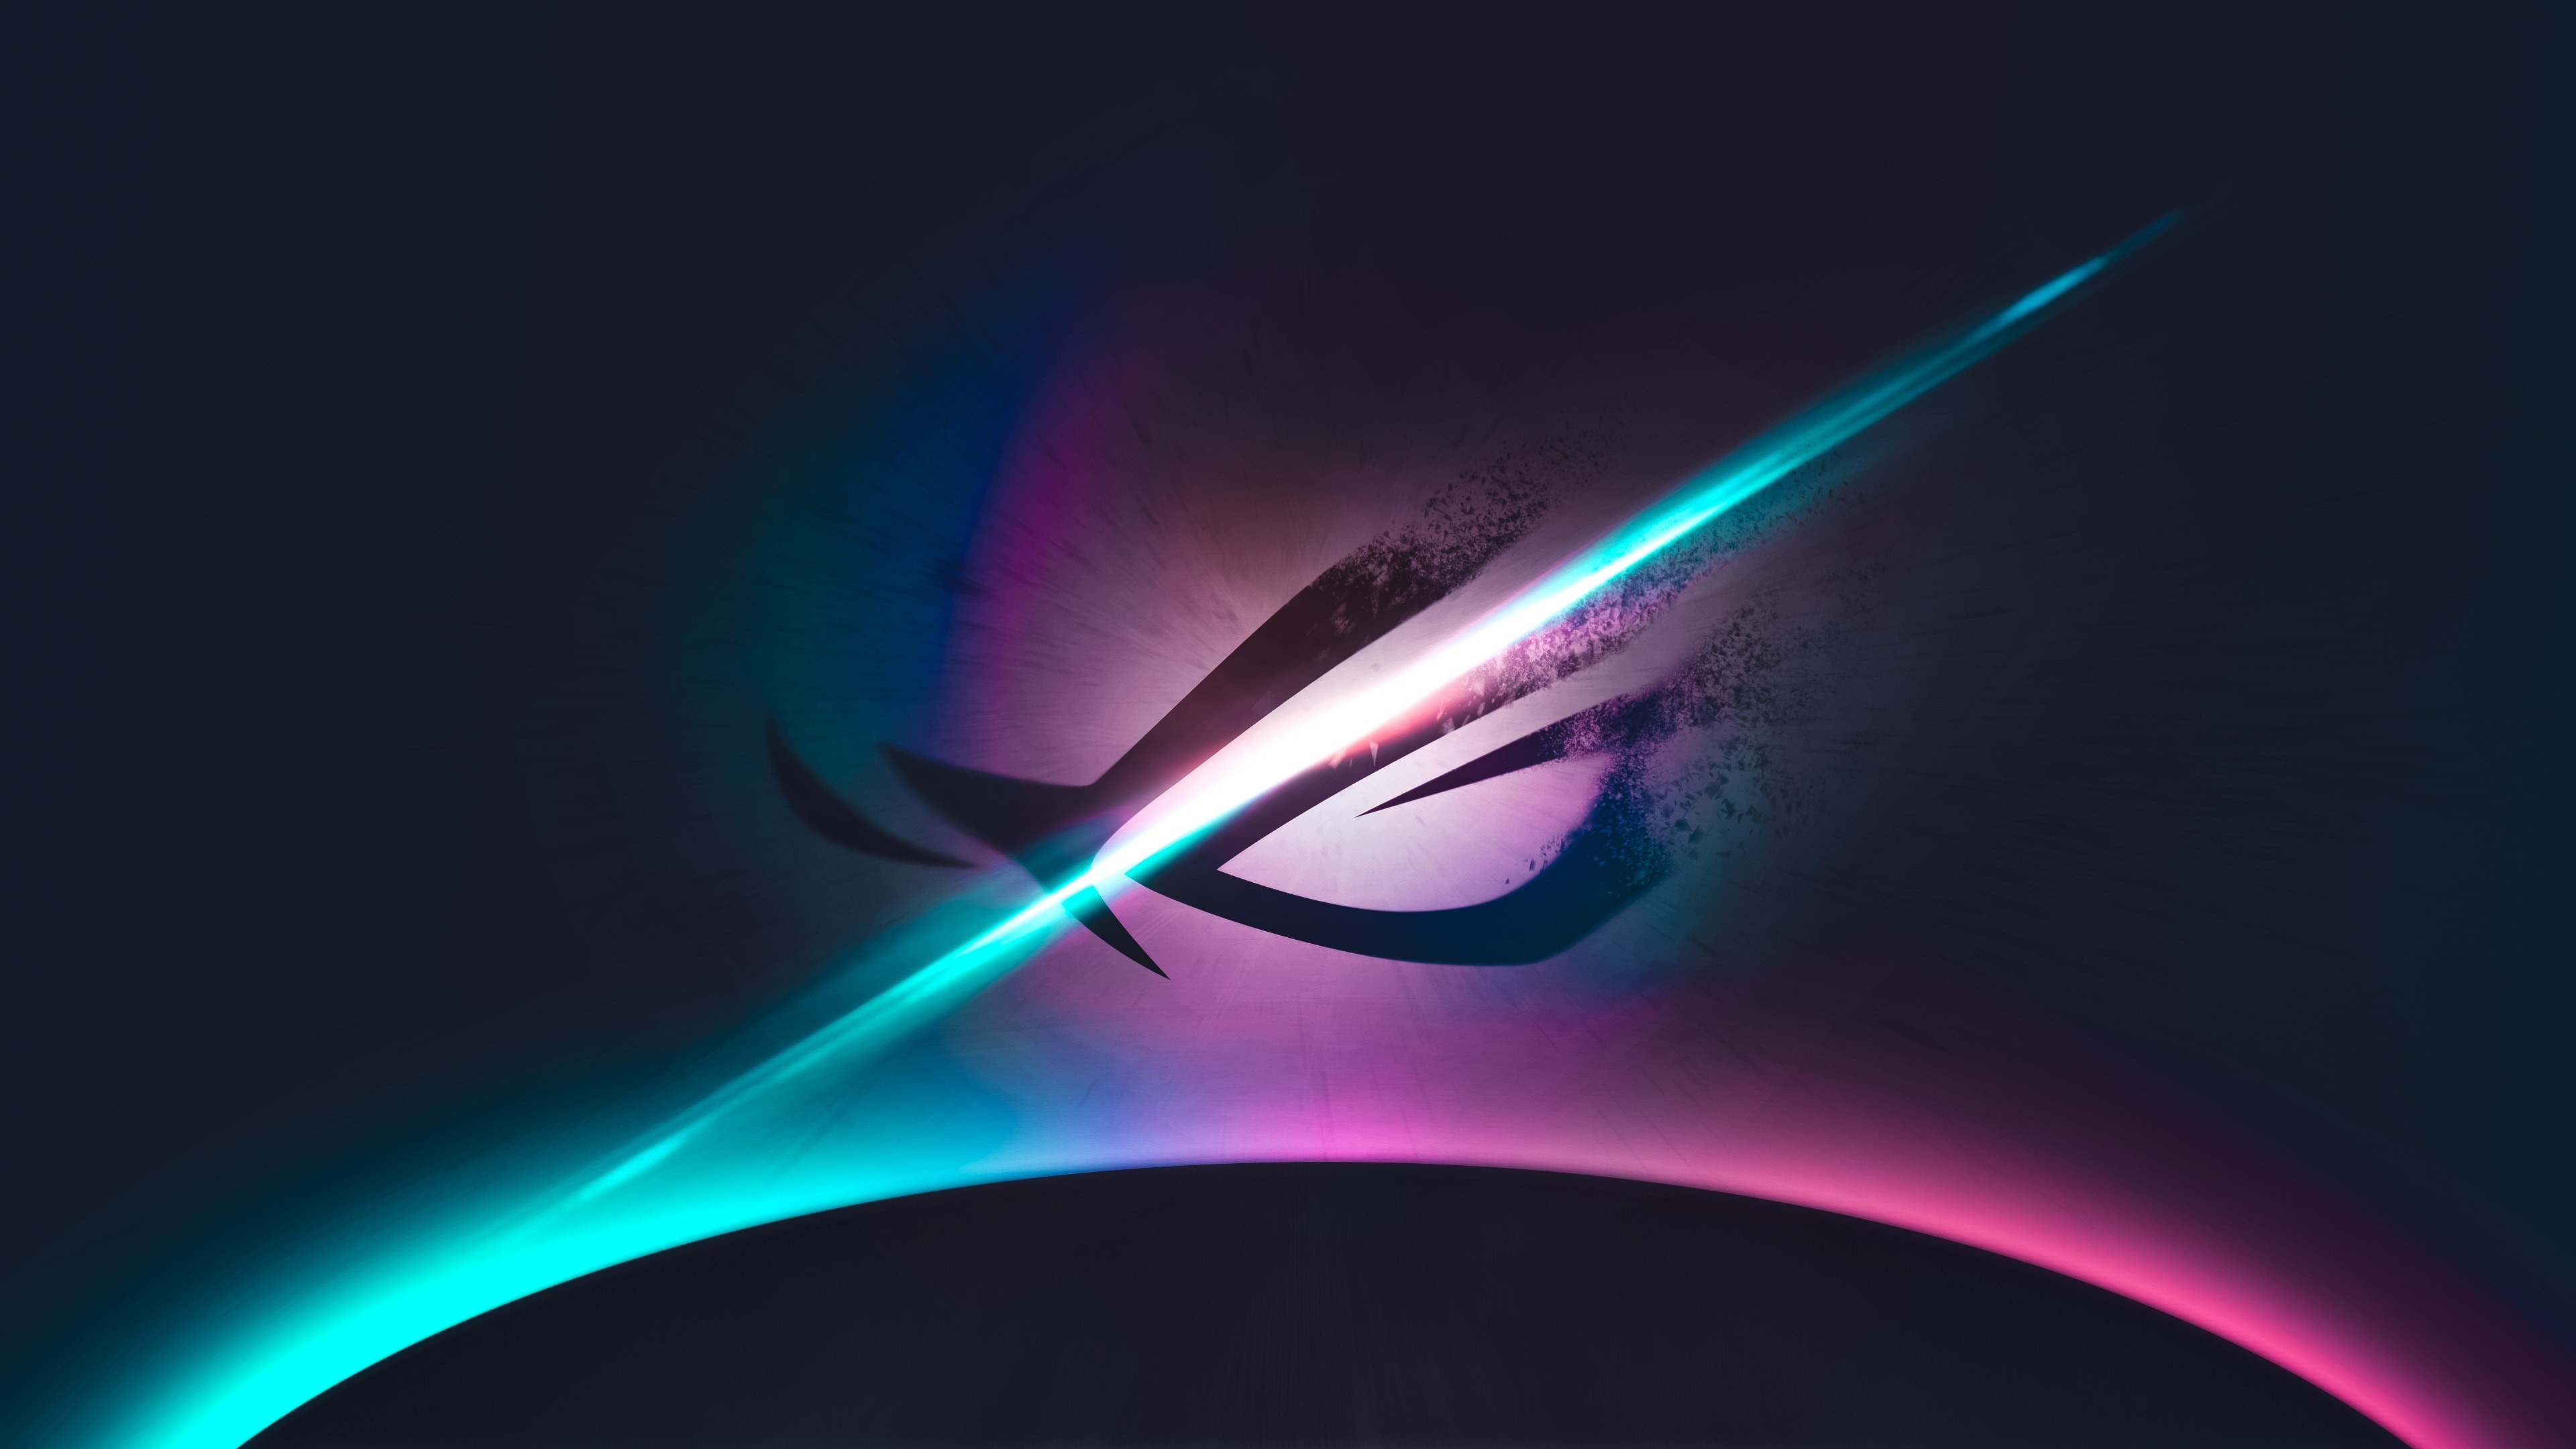 3840x2160 Best Asus Rog Logo 4k - Image #2960 - Licence: Free for Personal Use